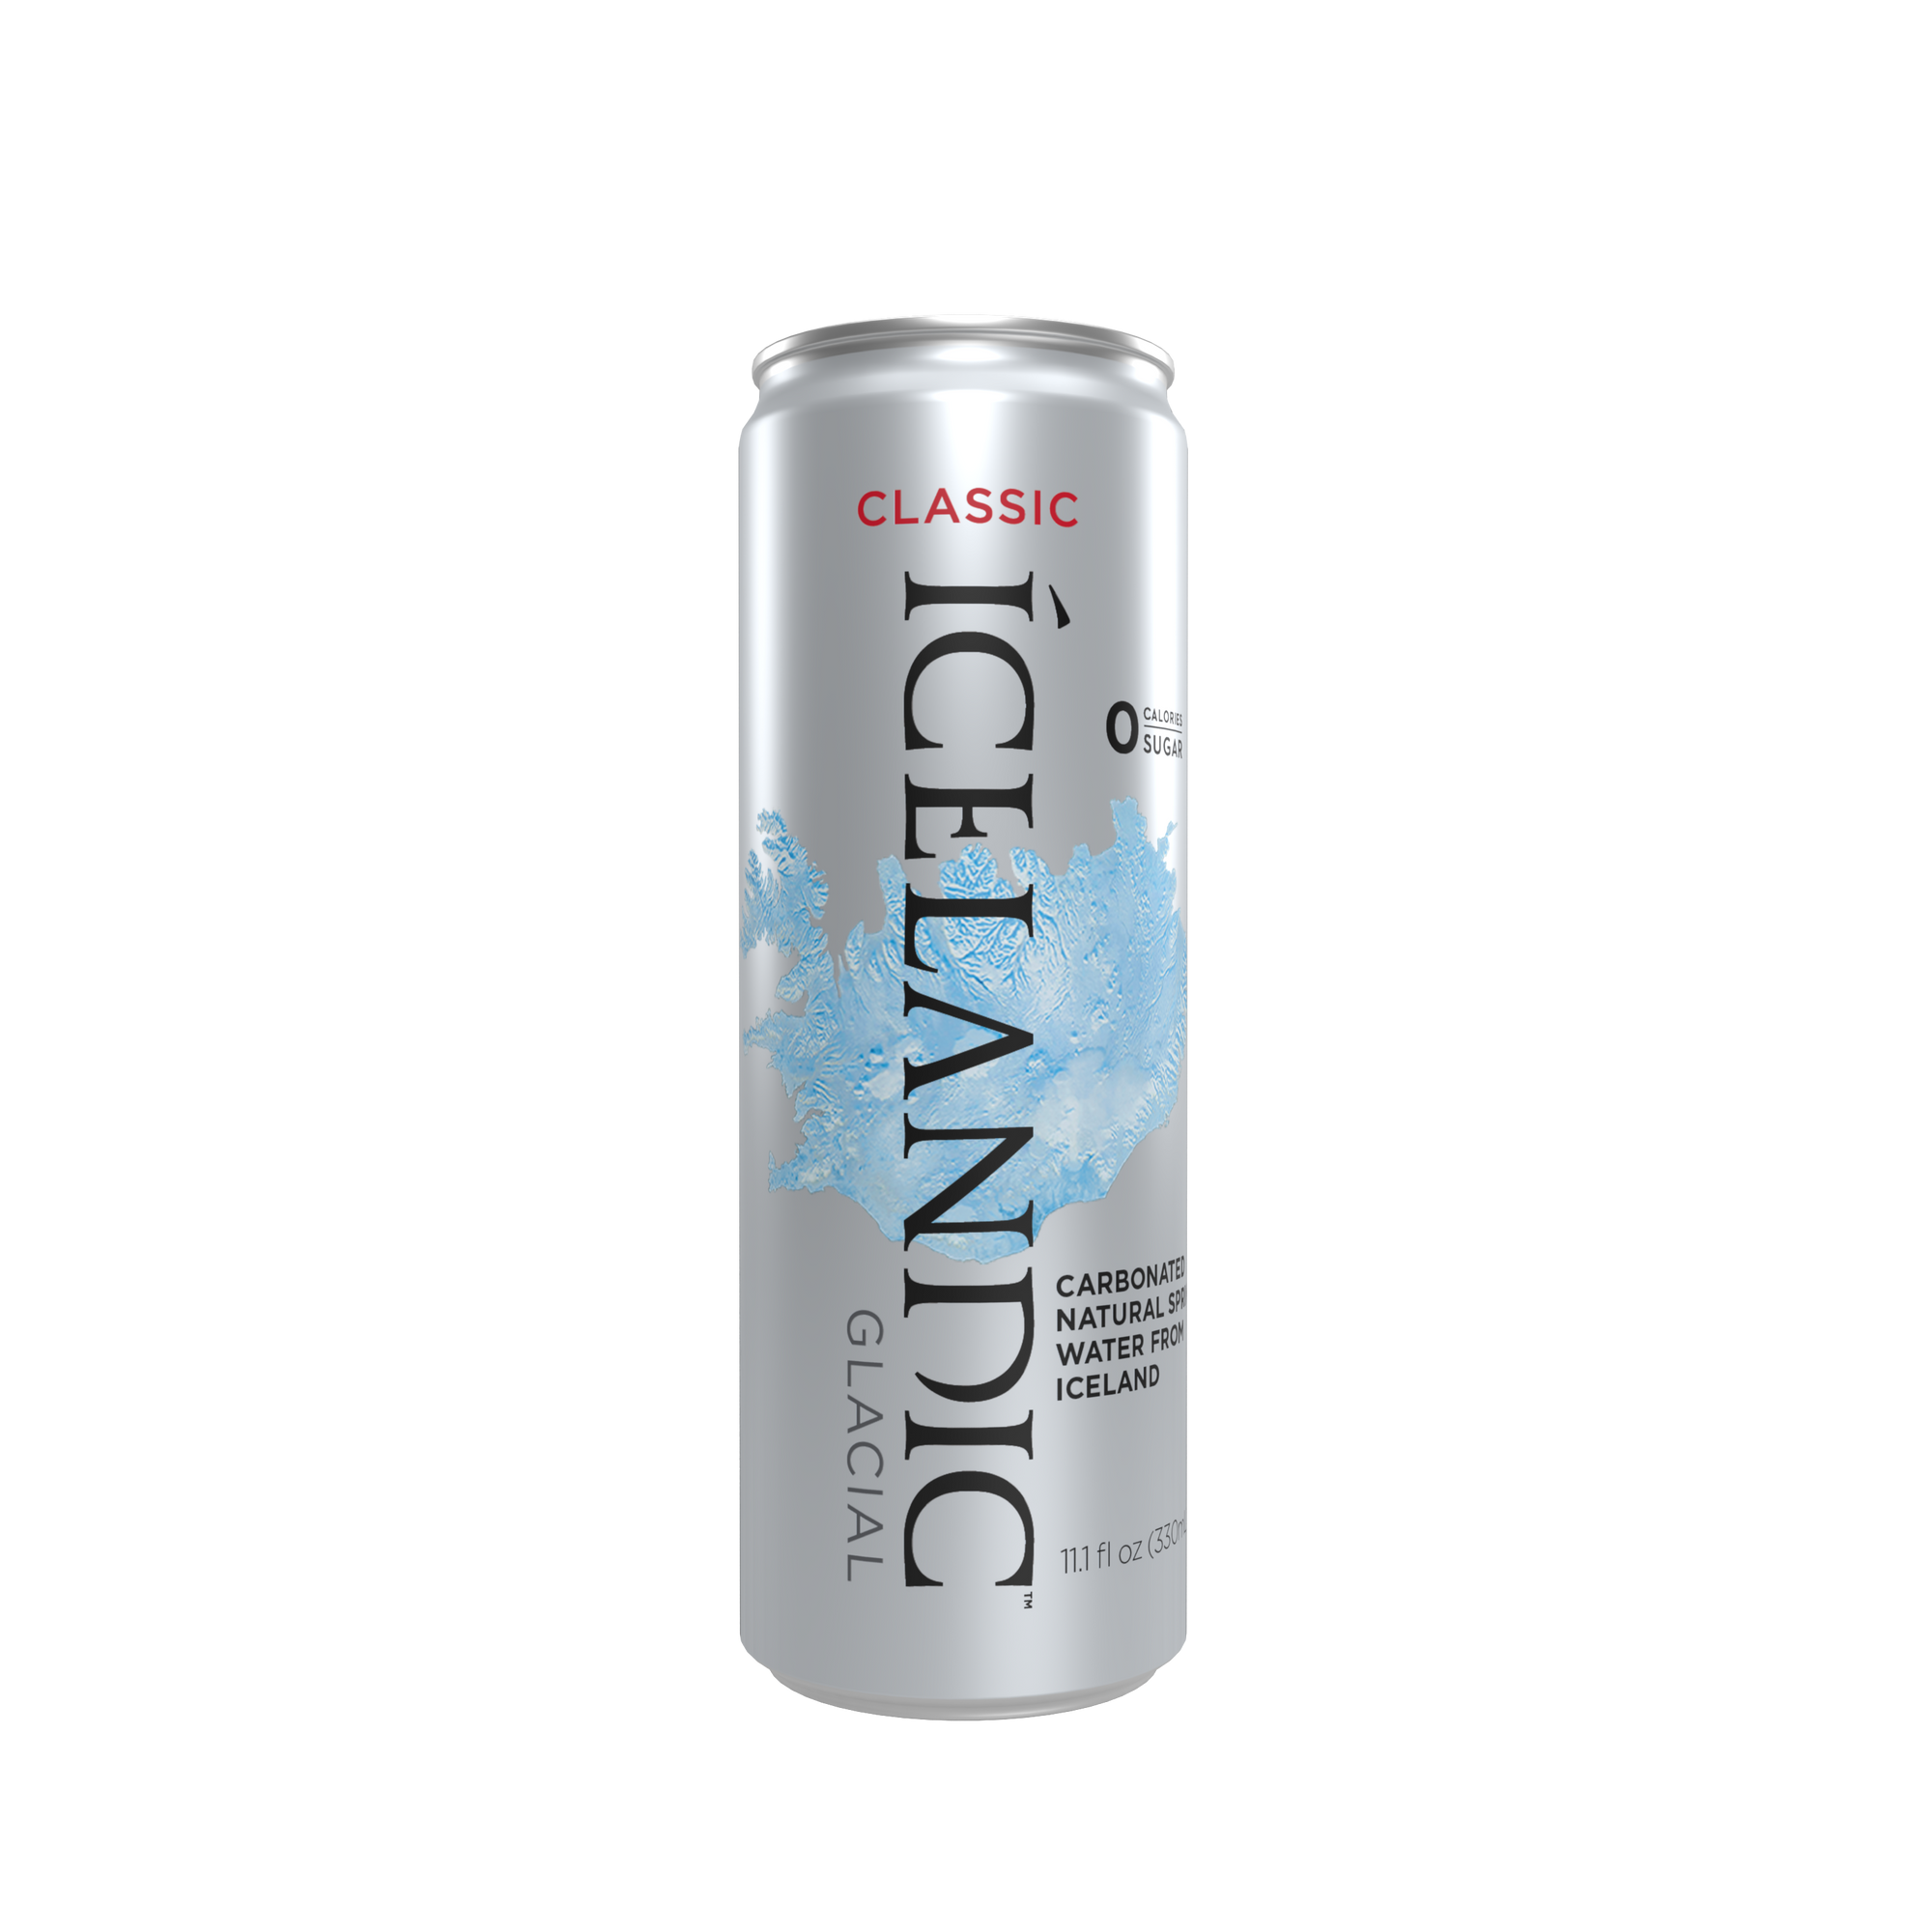 Icelandic Glacial Carbonated Non-flavored Water in Aluminum Cans (30 pack) - Icelandic Glacial